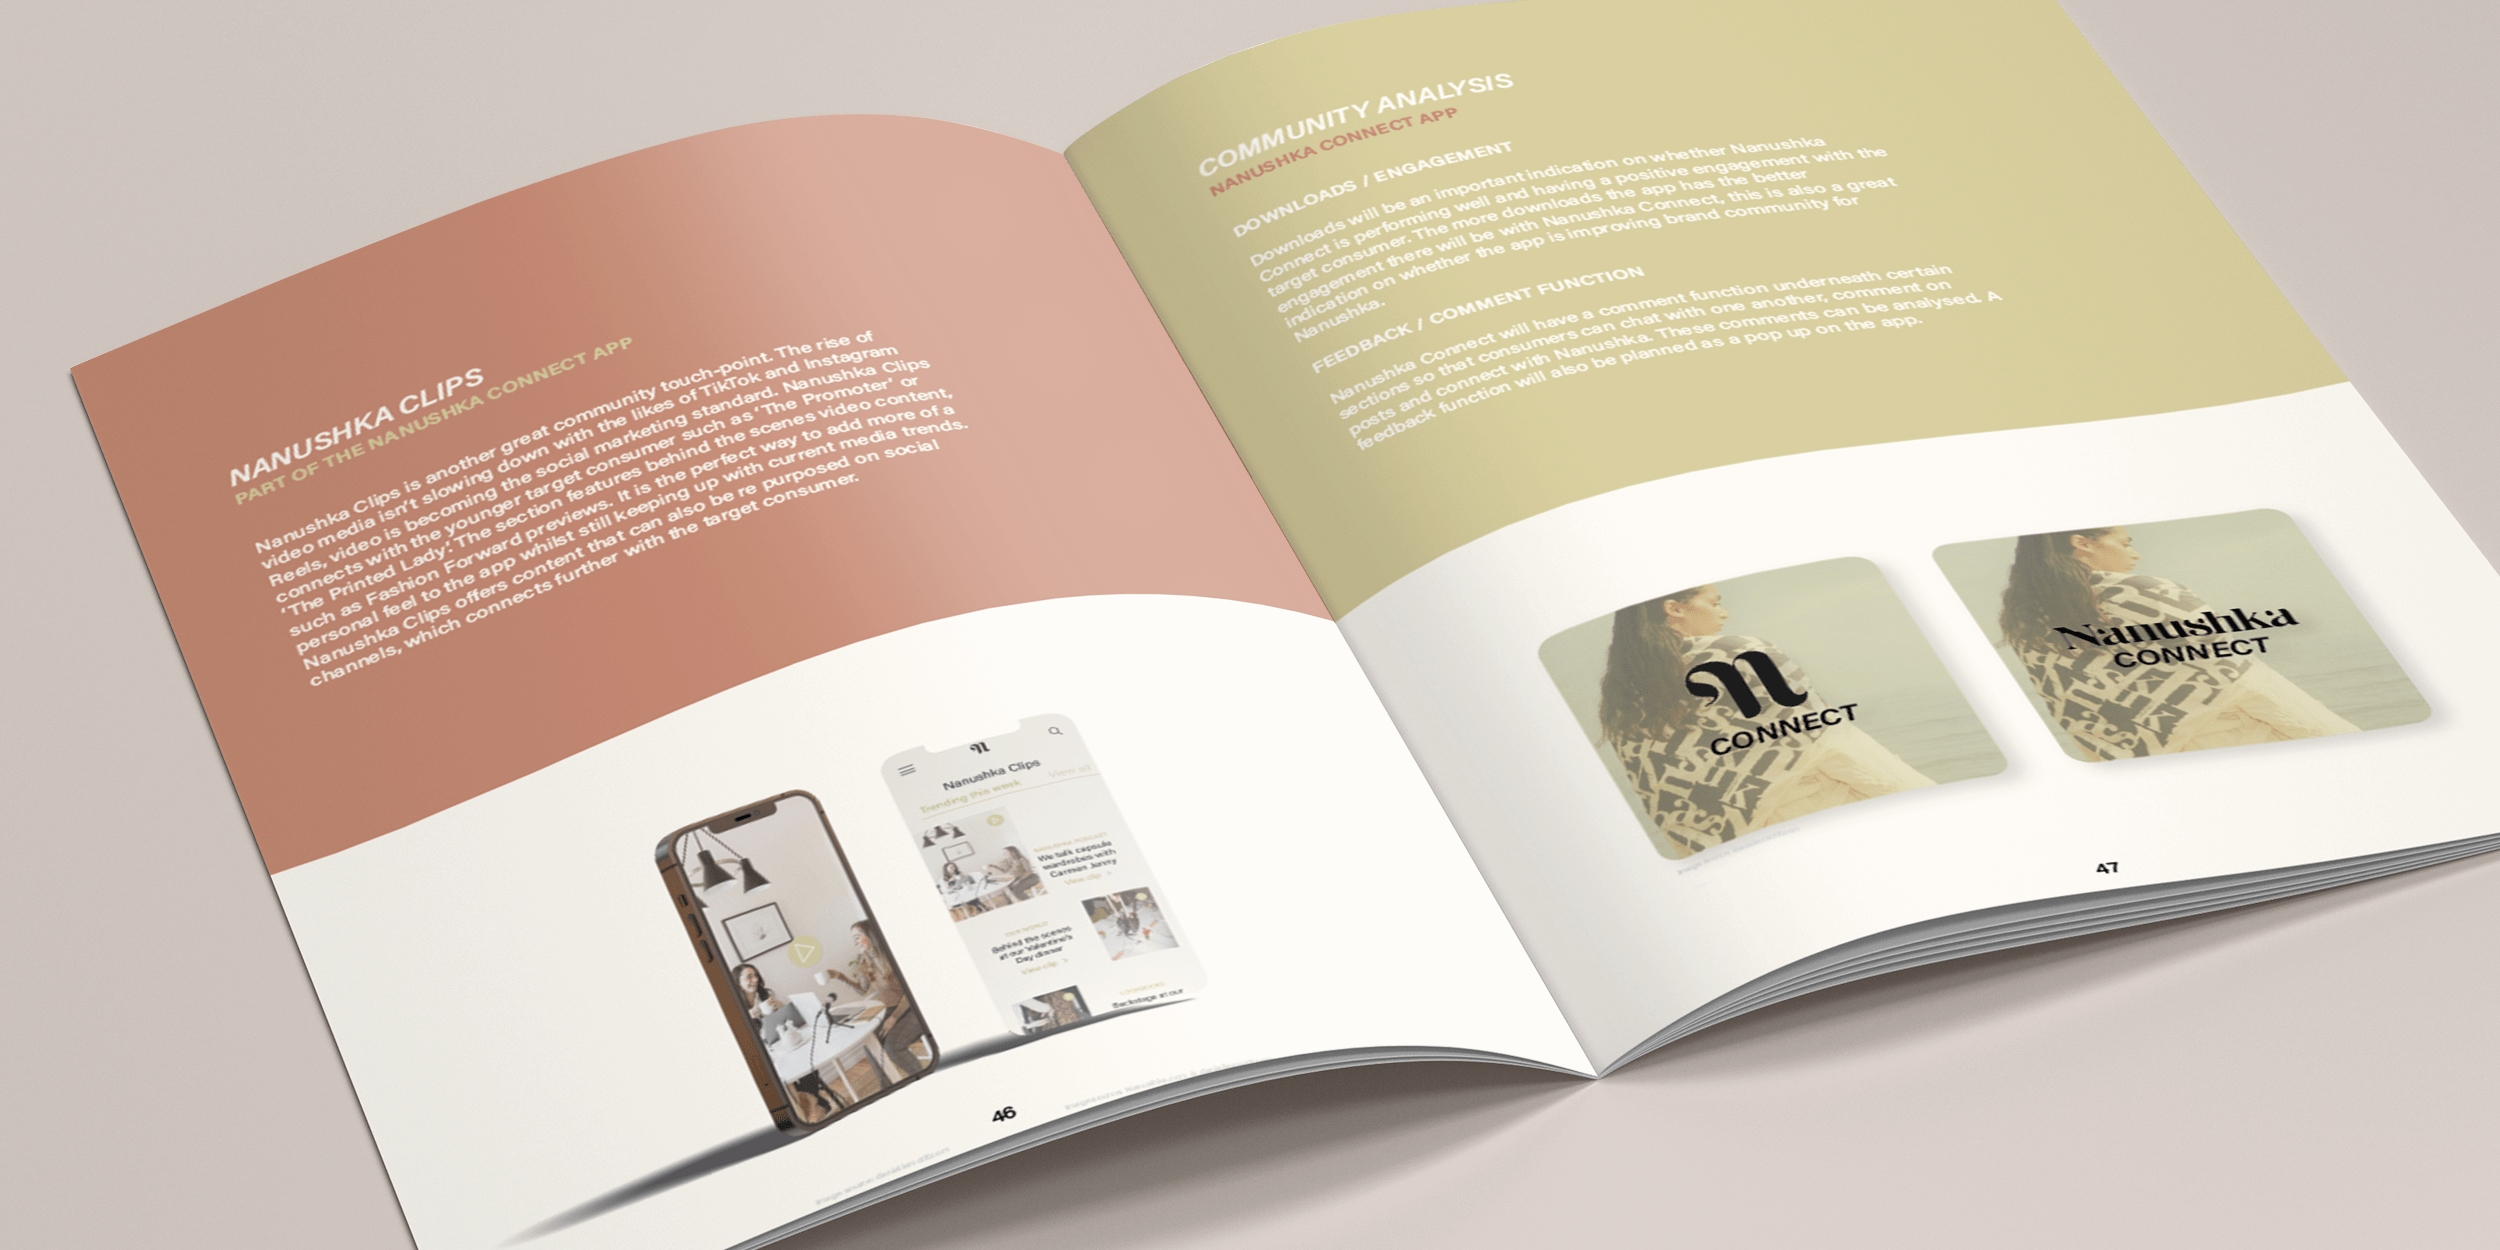 Mock-up shows an strategy document by fashion communication and promotion student Jodie Moss.